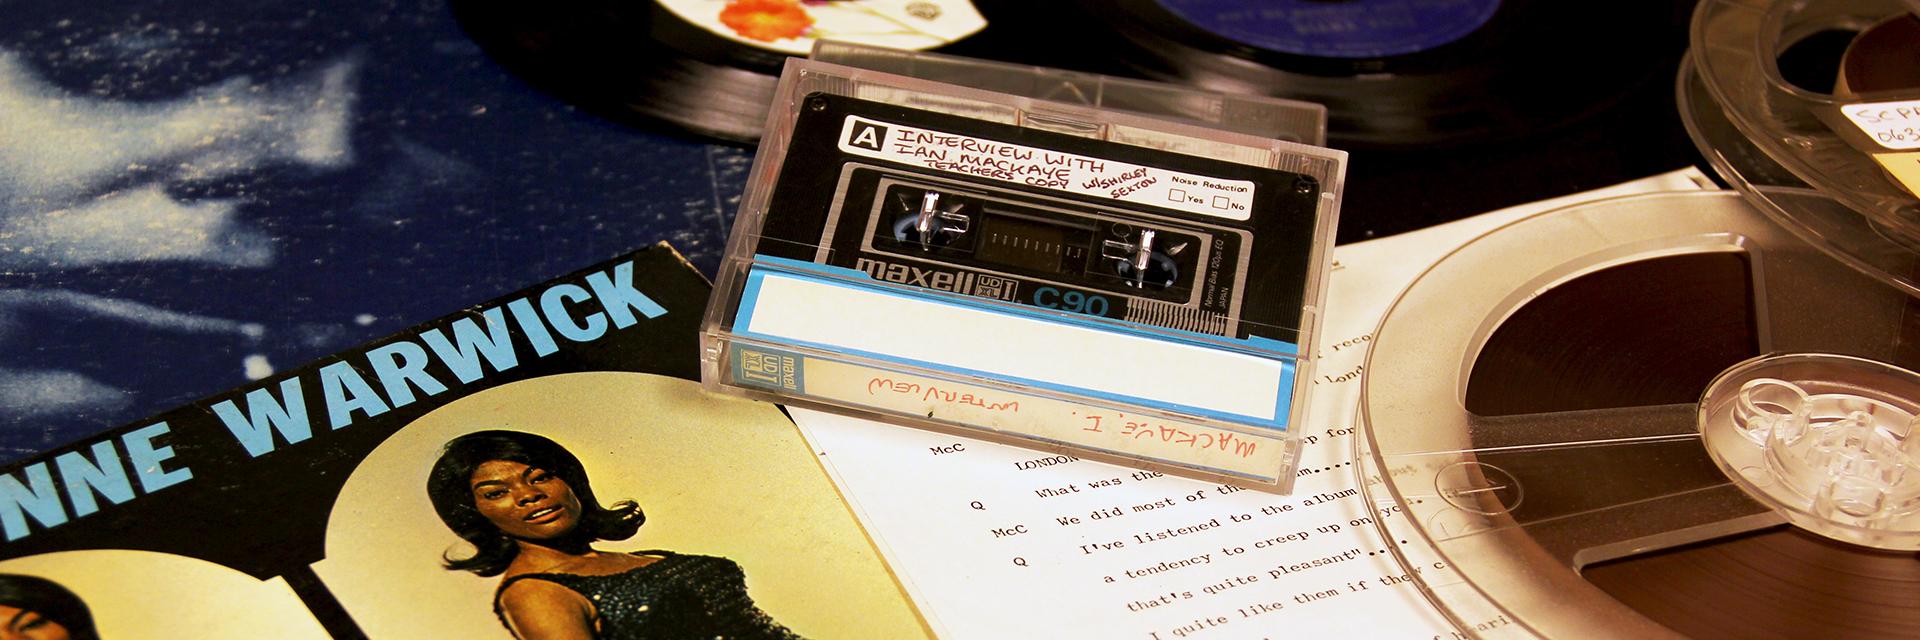 Records by Dionne Warwick and Joni Mitchell laid on a table with a 1/4" tape and a cassette of an interview with Ian MacKaye